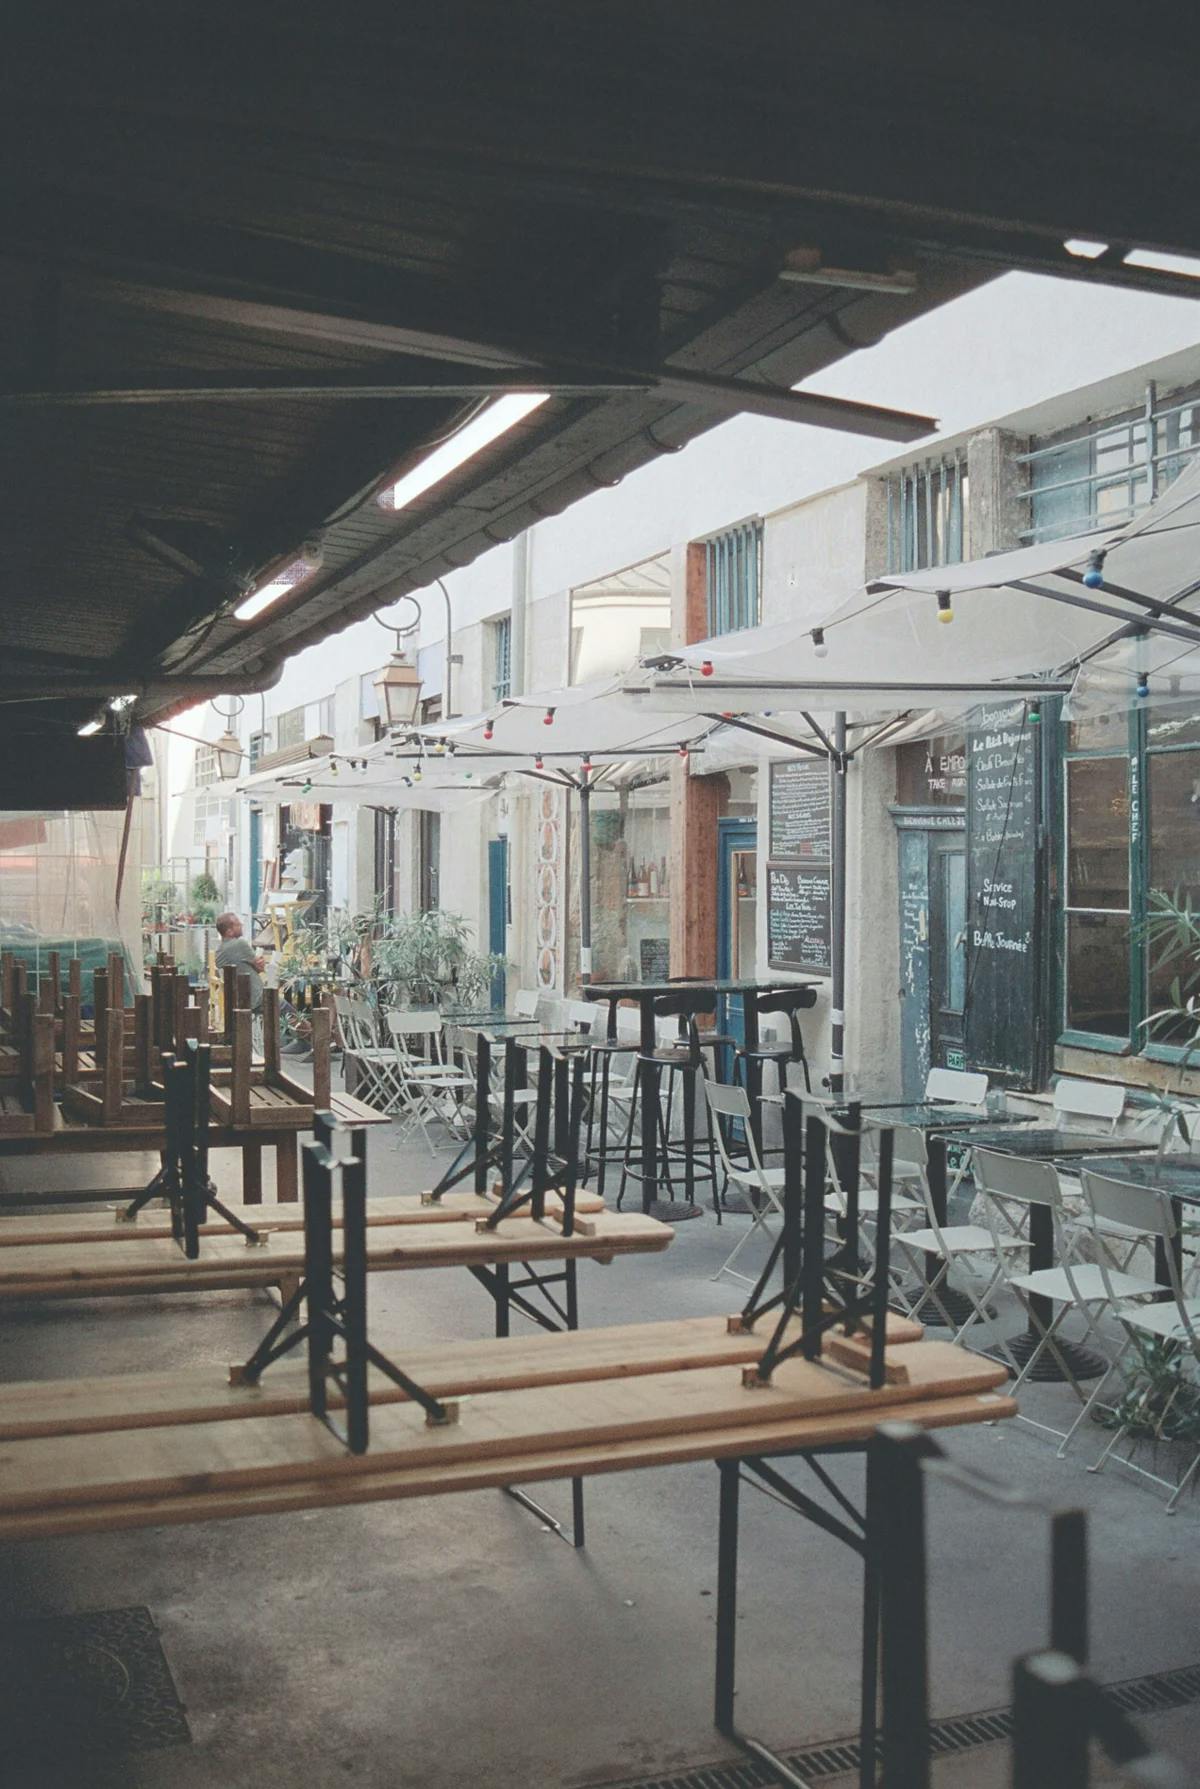 The Marché des Enfants Rouges in the Paris 3rd arrondissement, with outdoor patio tables and umbrellas under an awning.